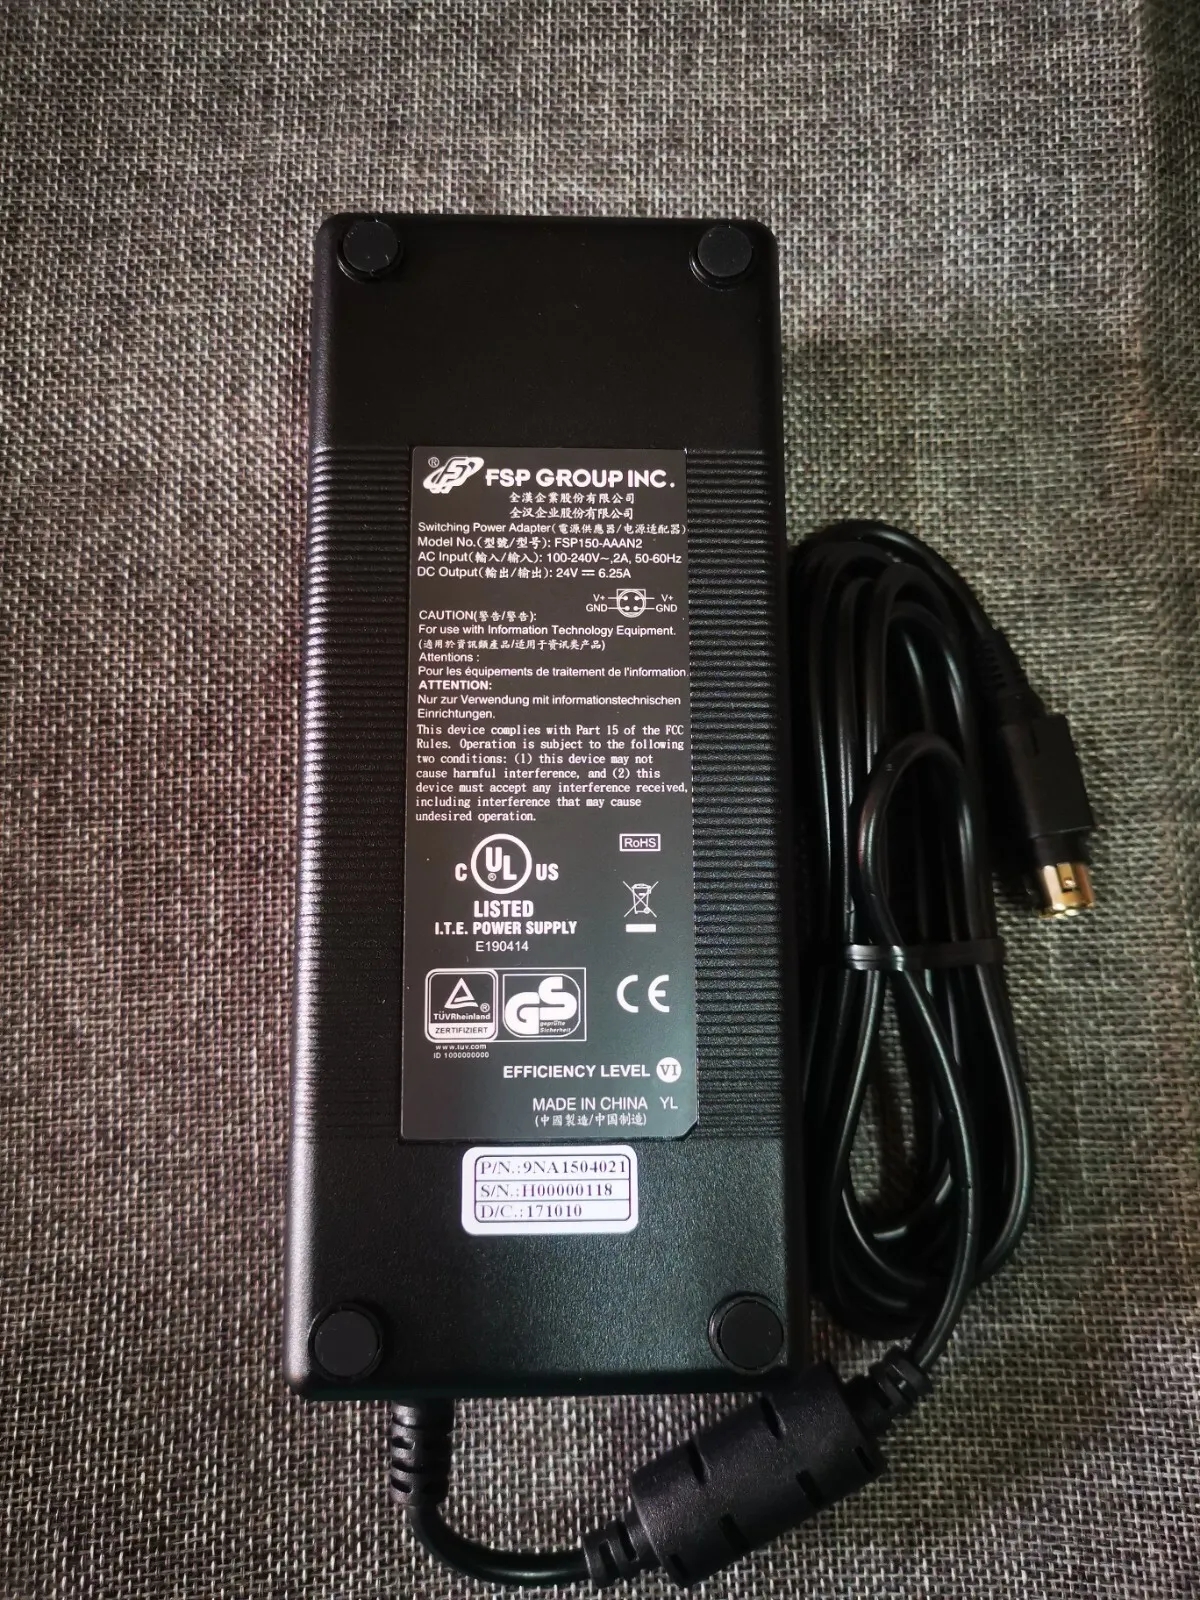 *Brand NEW*Genuine FSP 24V 6.25A 150W AC/DC Adapter FSP150-AAAN2 Power Supply